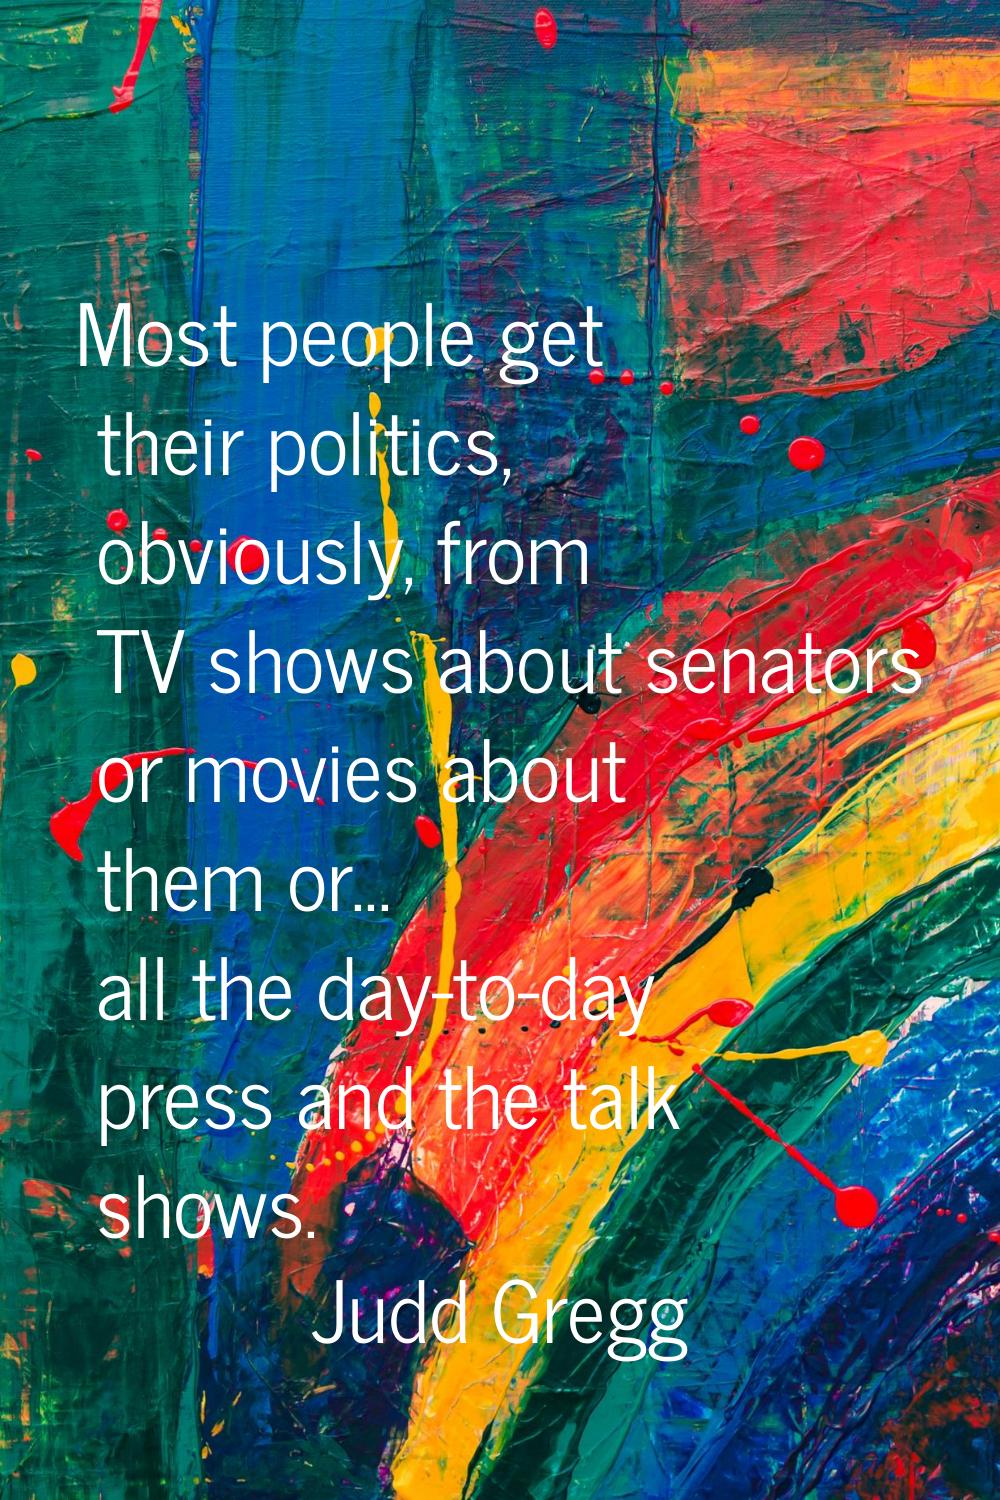 Most people get their politics, obviously, from TV shows about senators or movies about them or... 